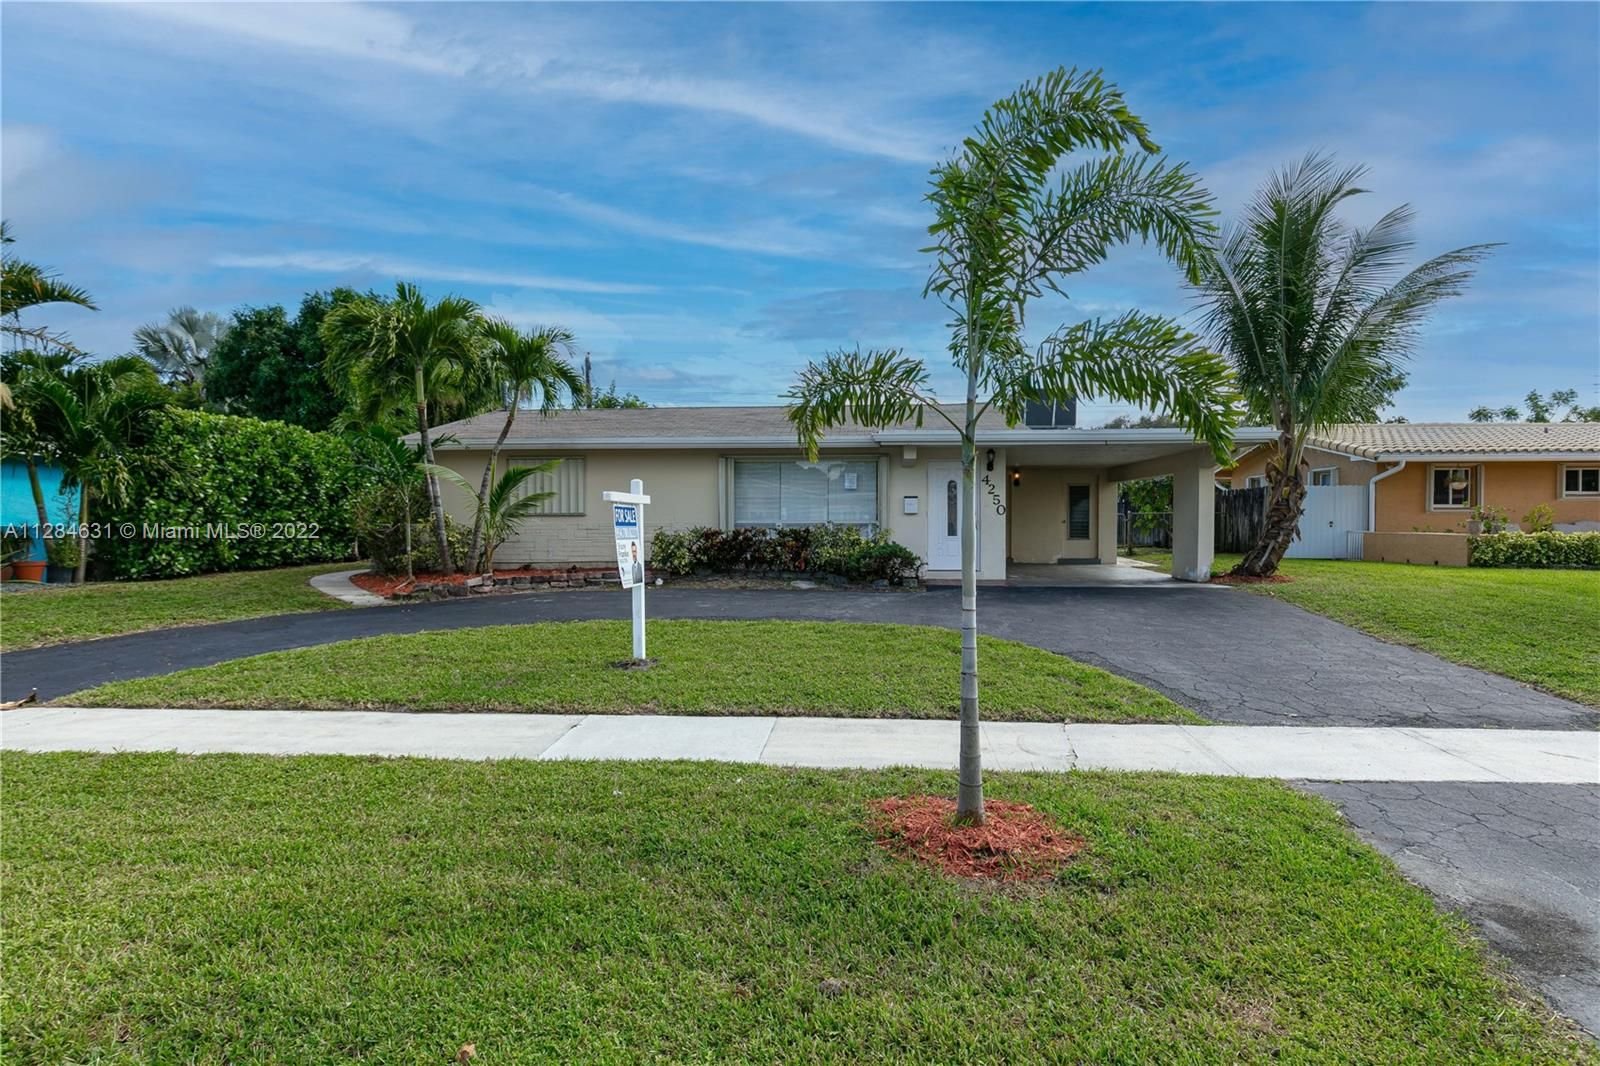 Real estate property located at 4250 10th St, Broward County, Coconut Creek, FL